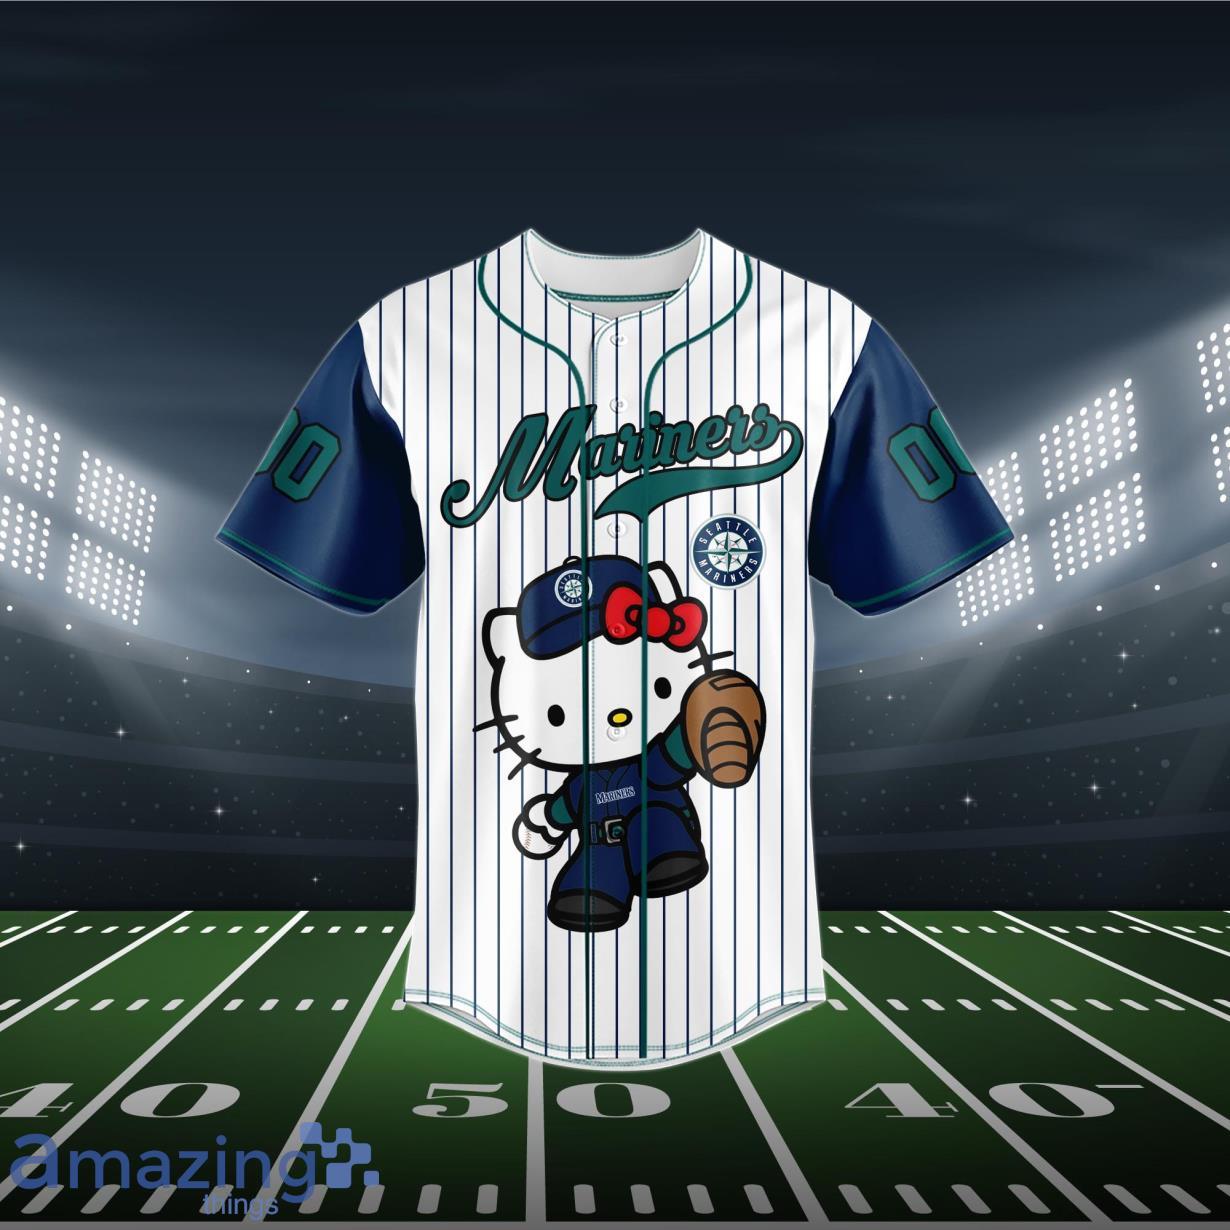 Official Seattle Mariners Custom Jerseys, Customized Mariners